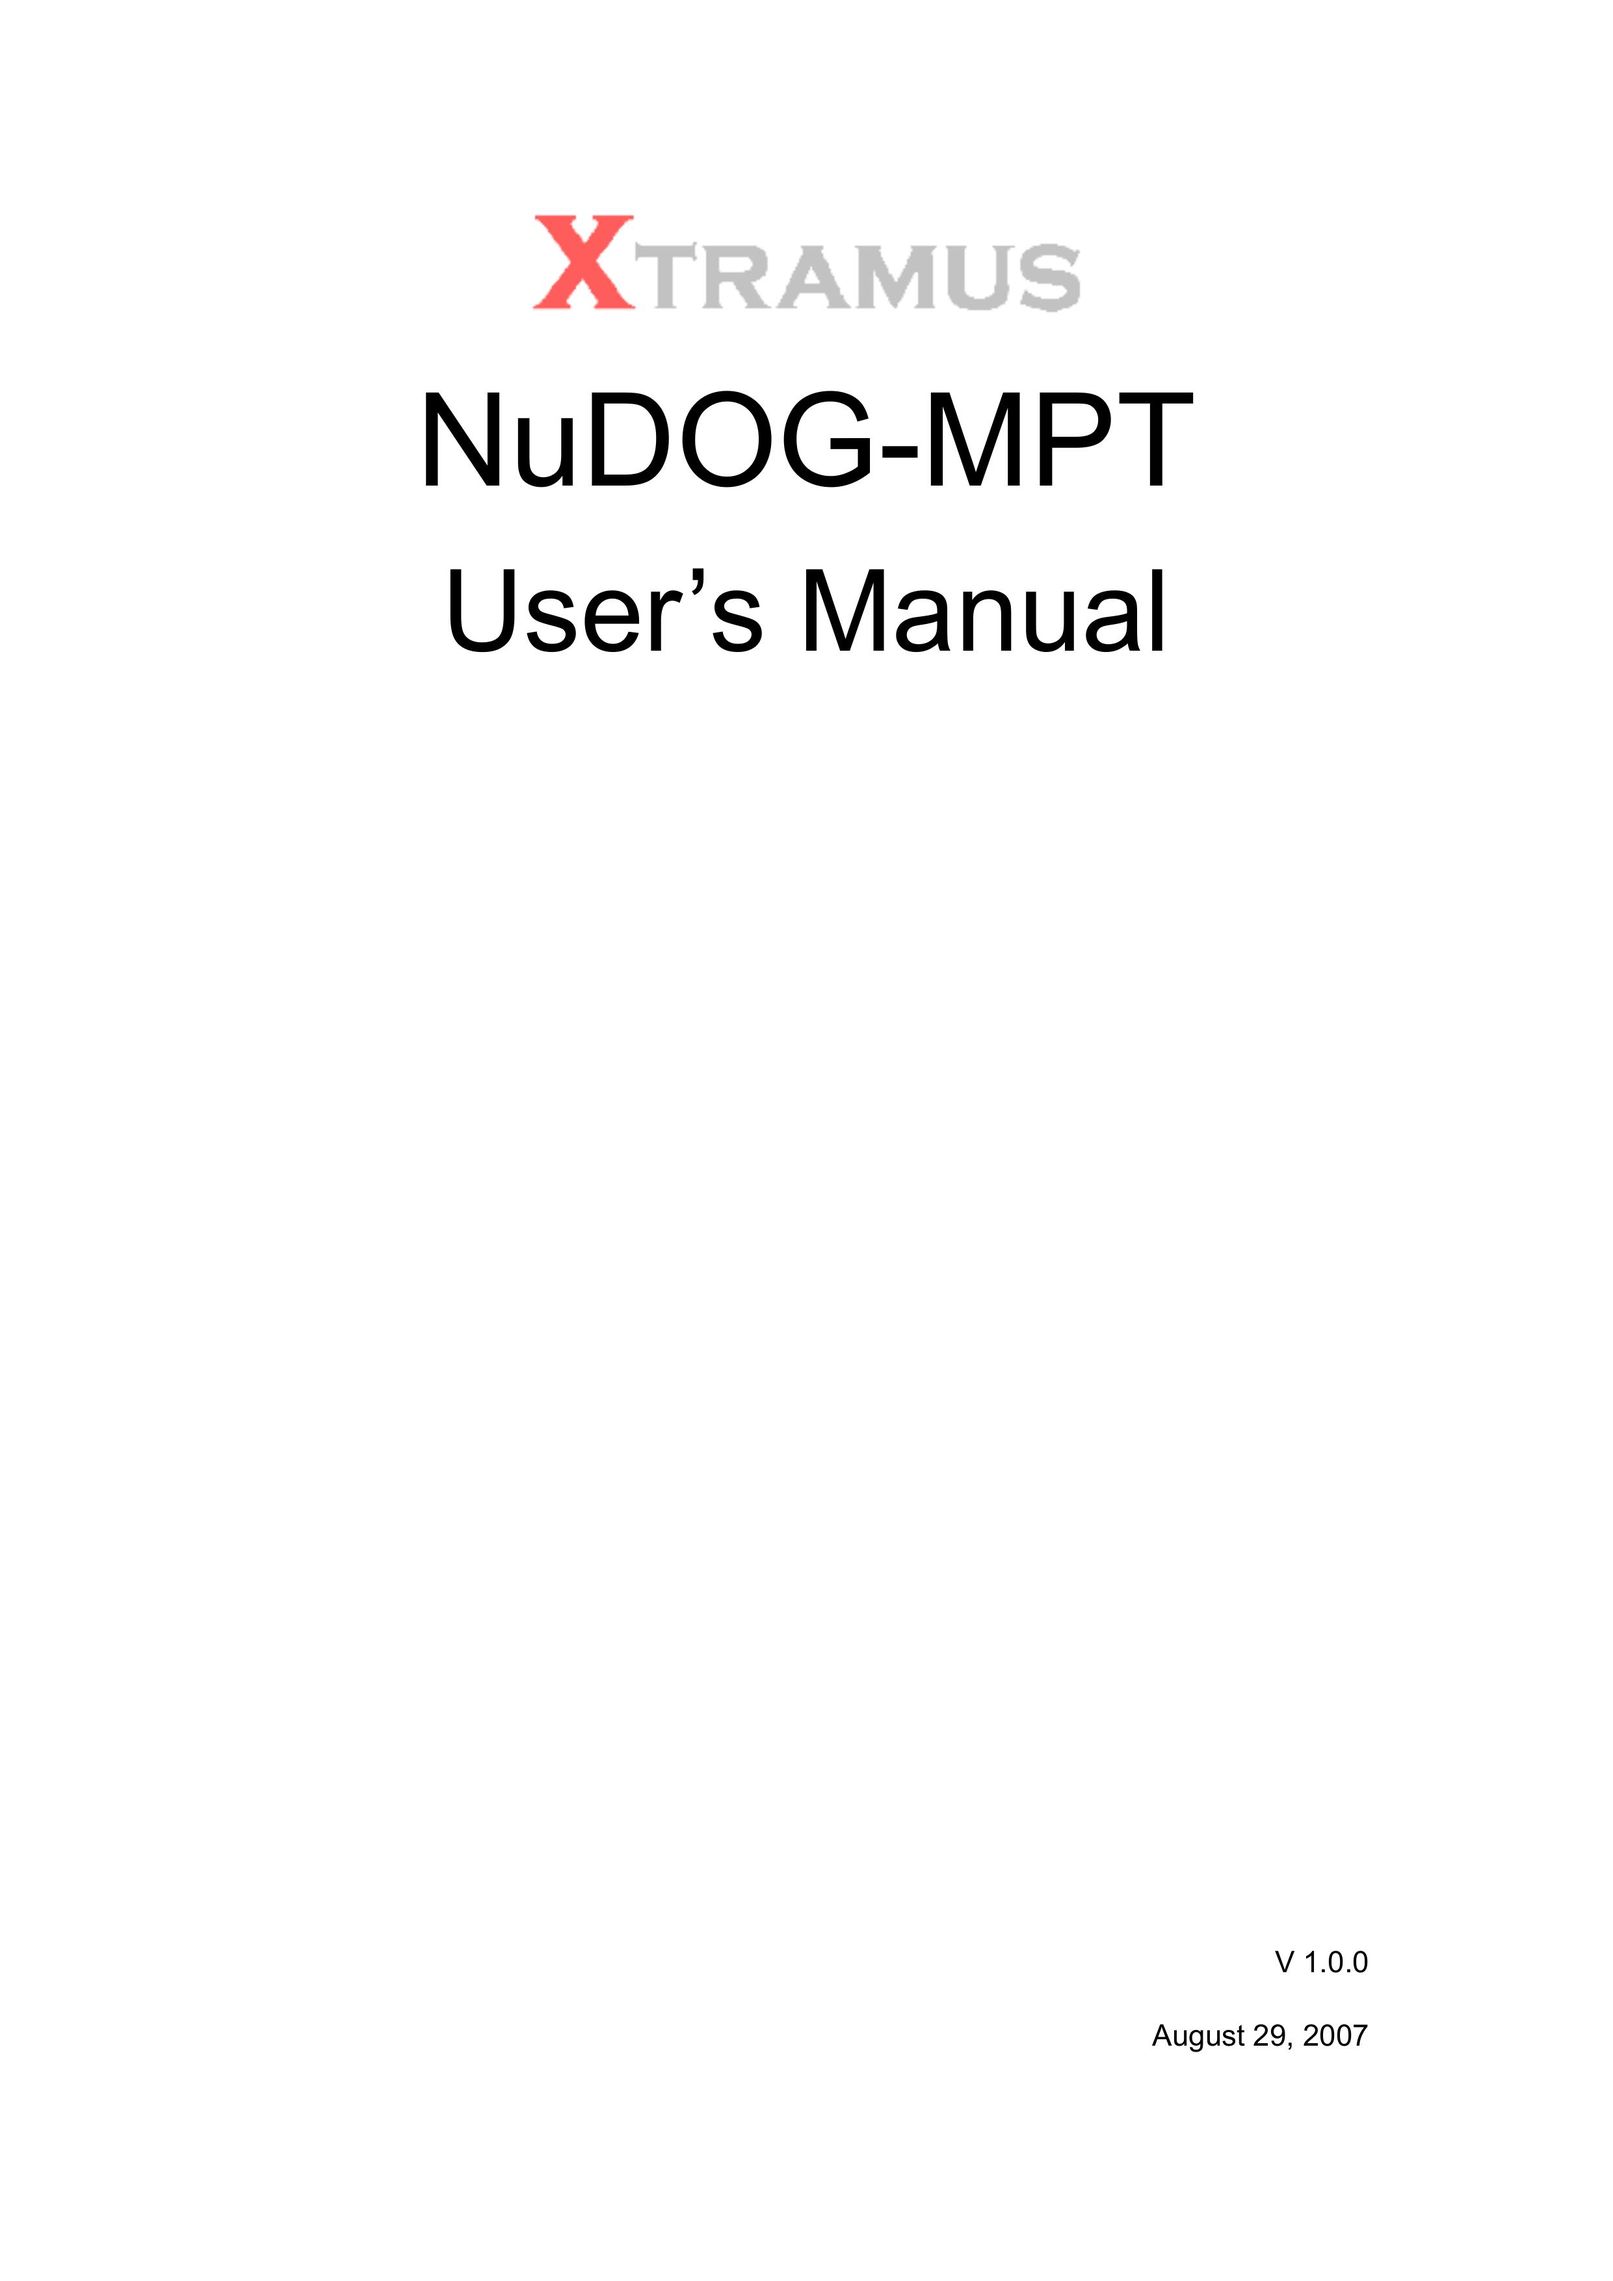 Alloy Computer Products NuDOG-MPT Network Card User Manual